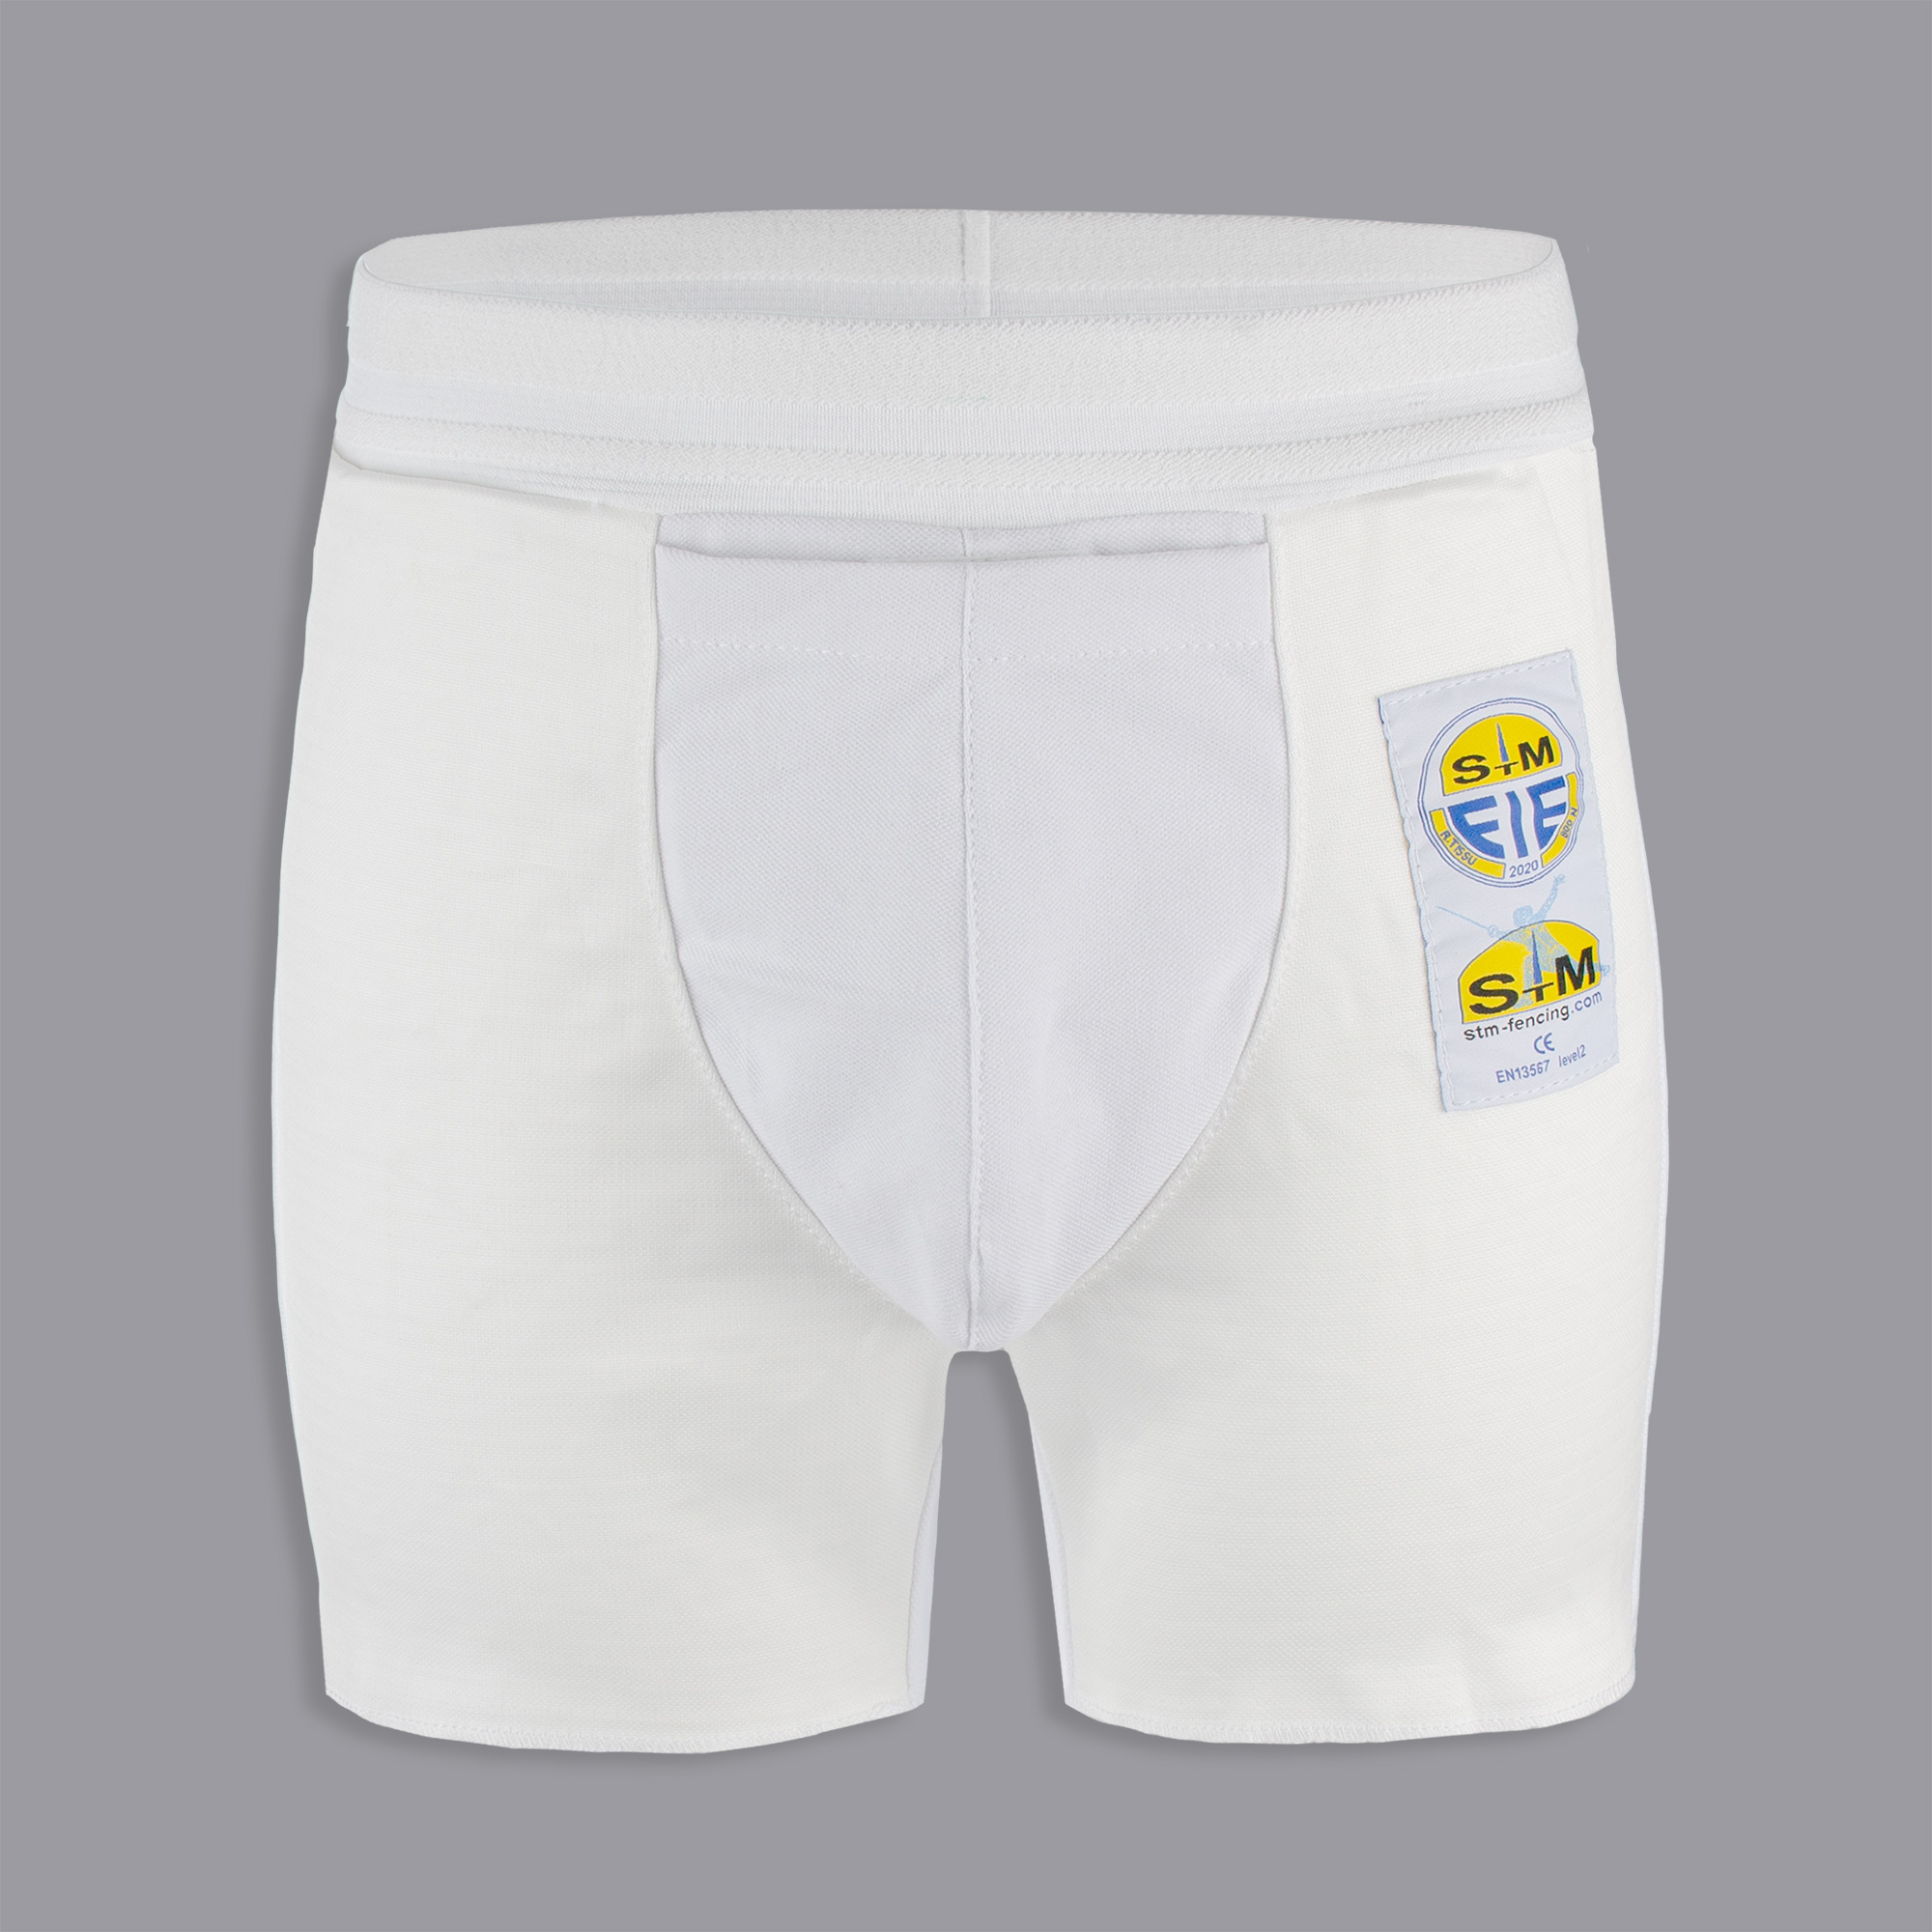 Protective shorts with a pocket for a shell-bandage